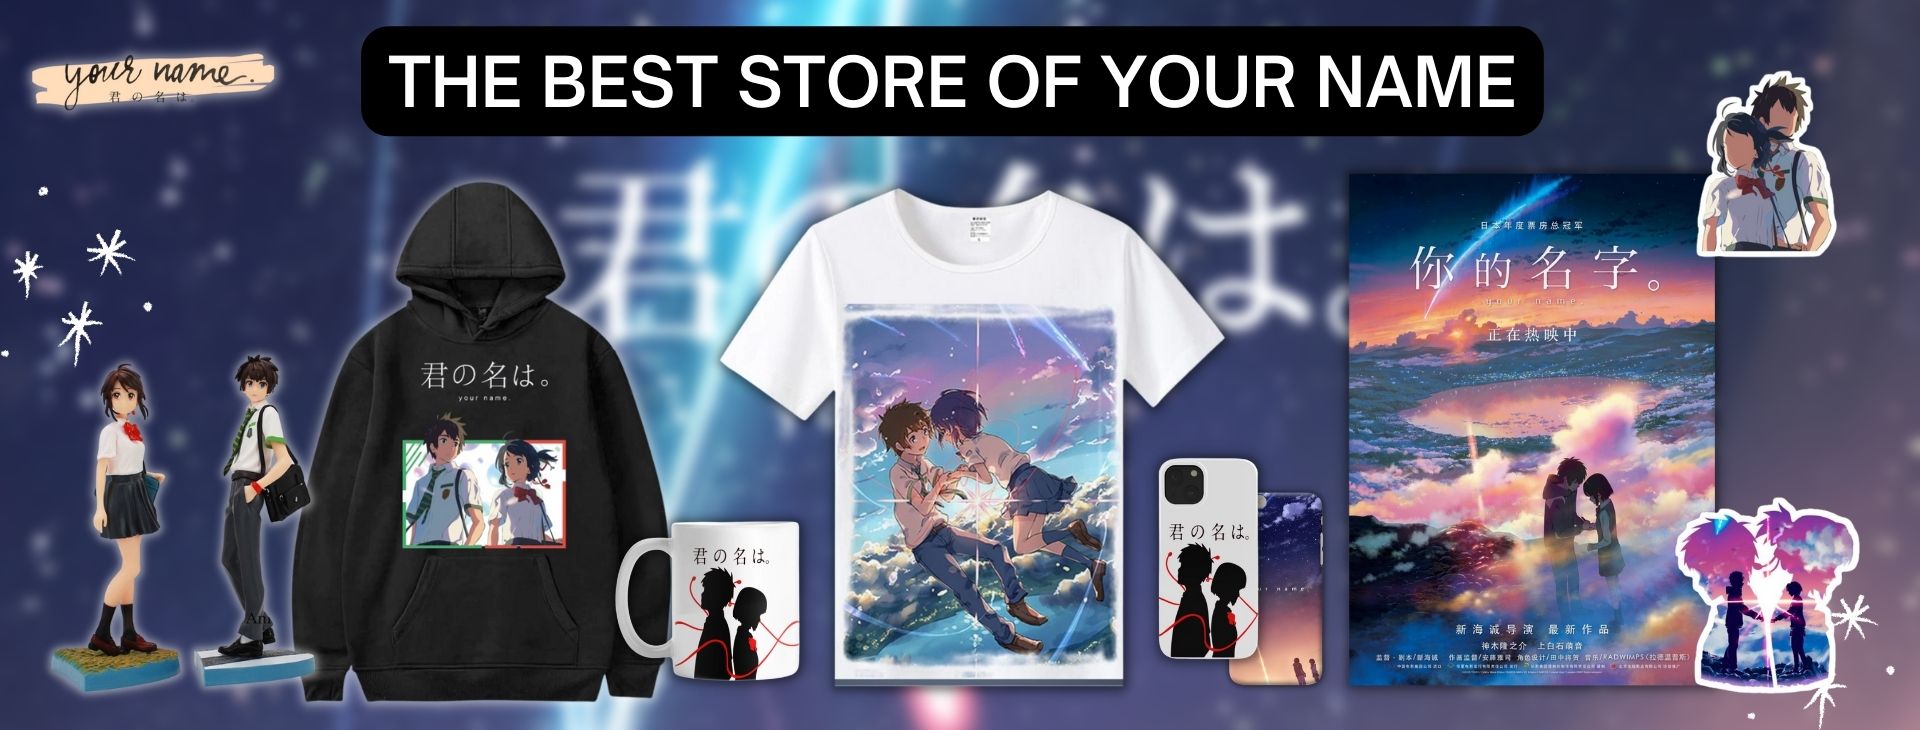 Your Name Banner - Your Name Shop